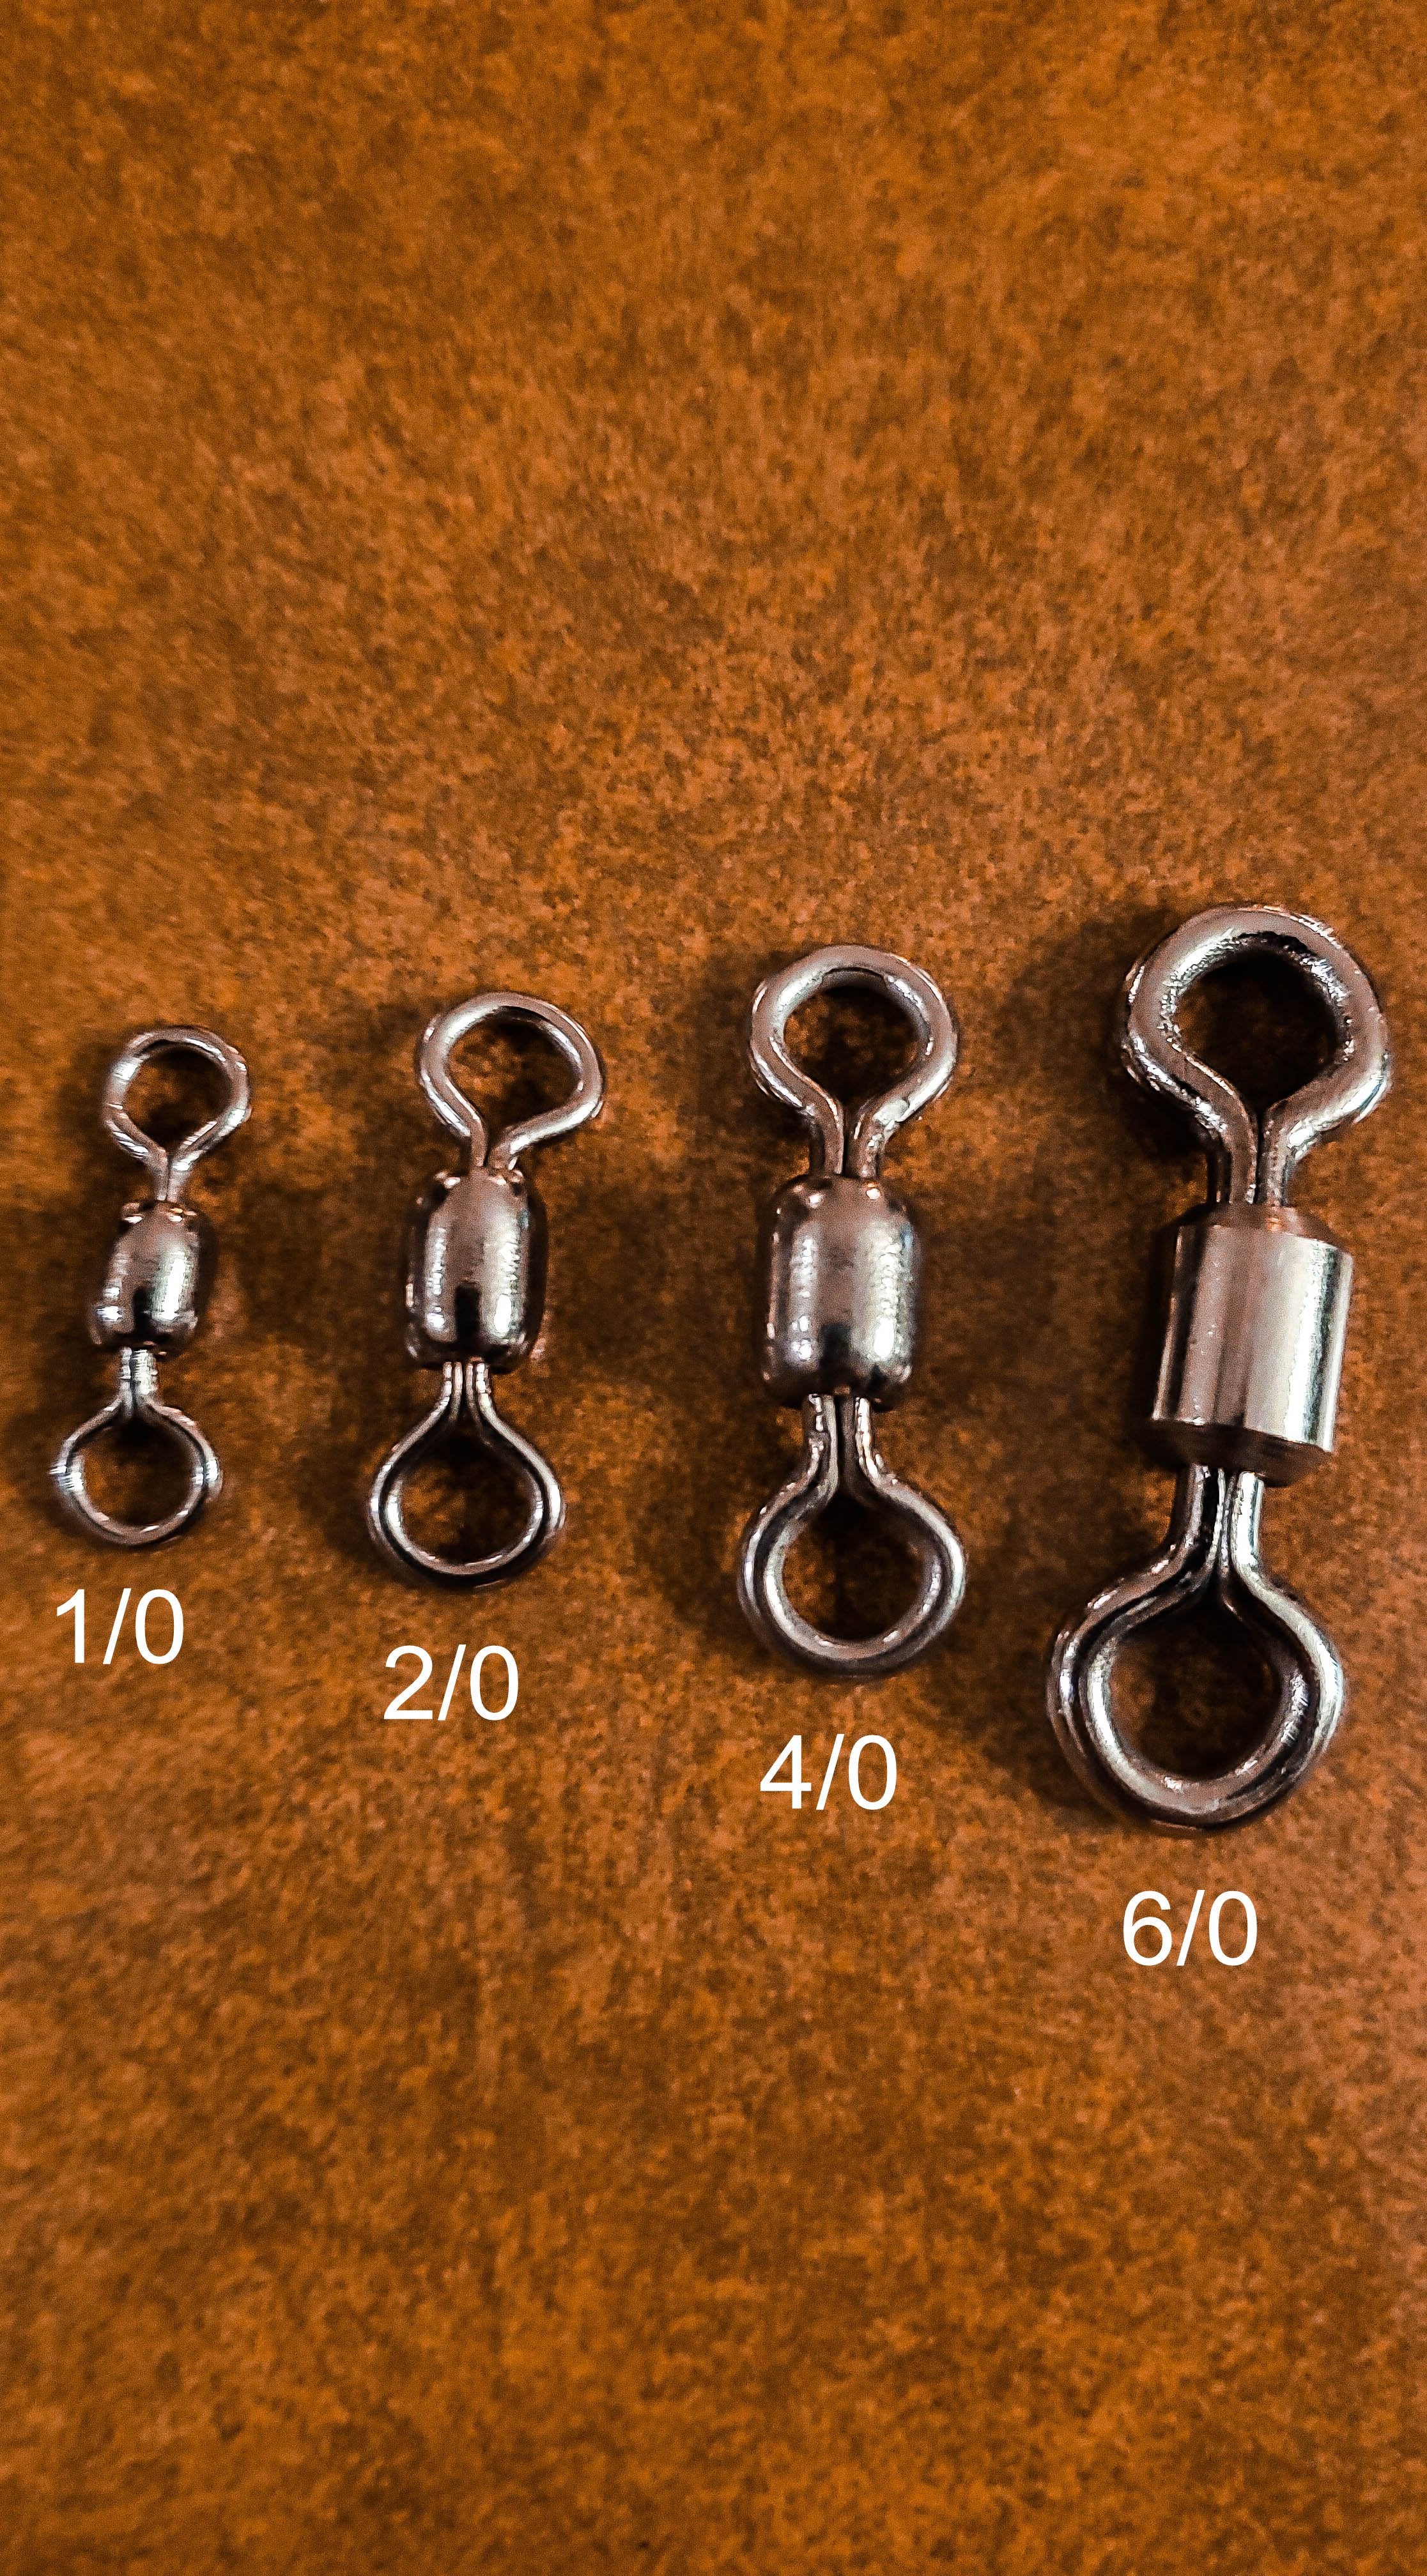 6 Size Swivels for sale